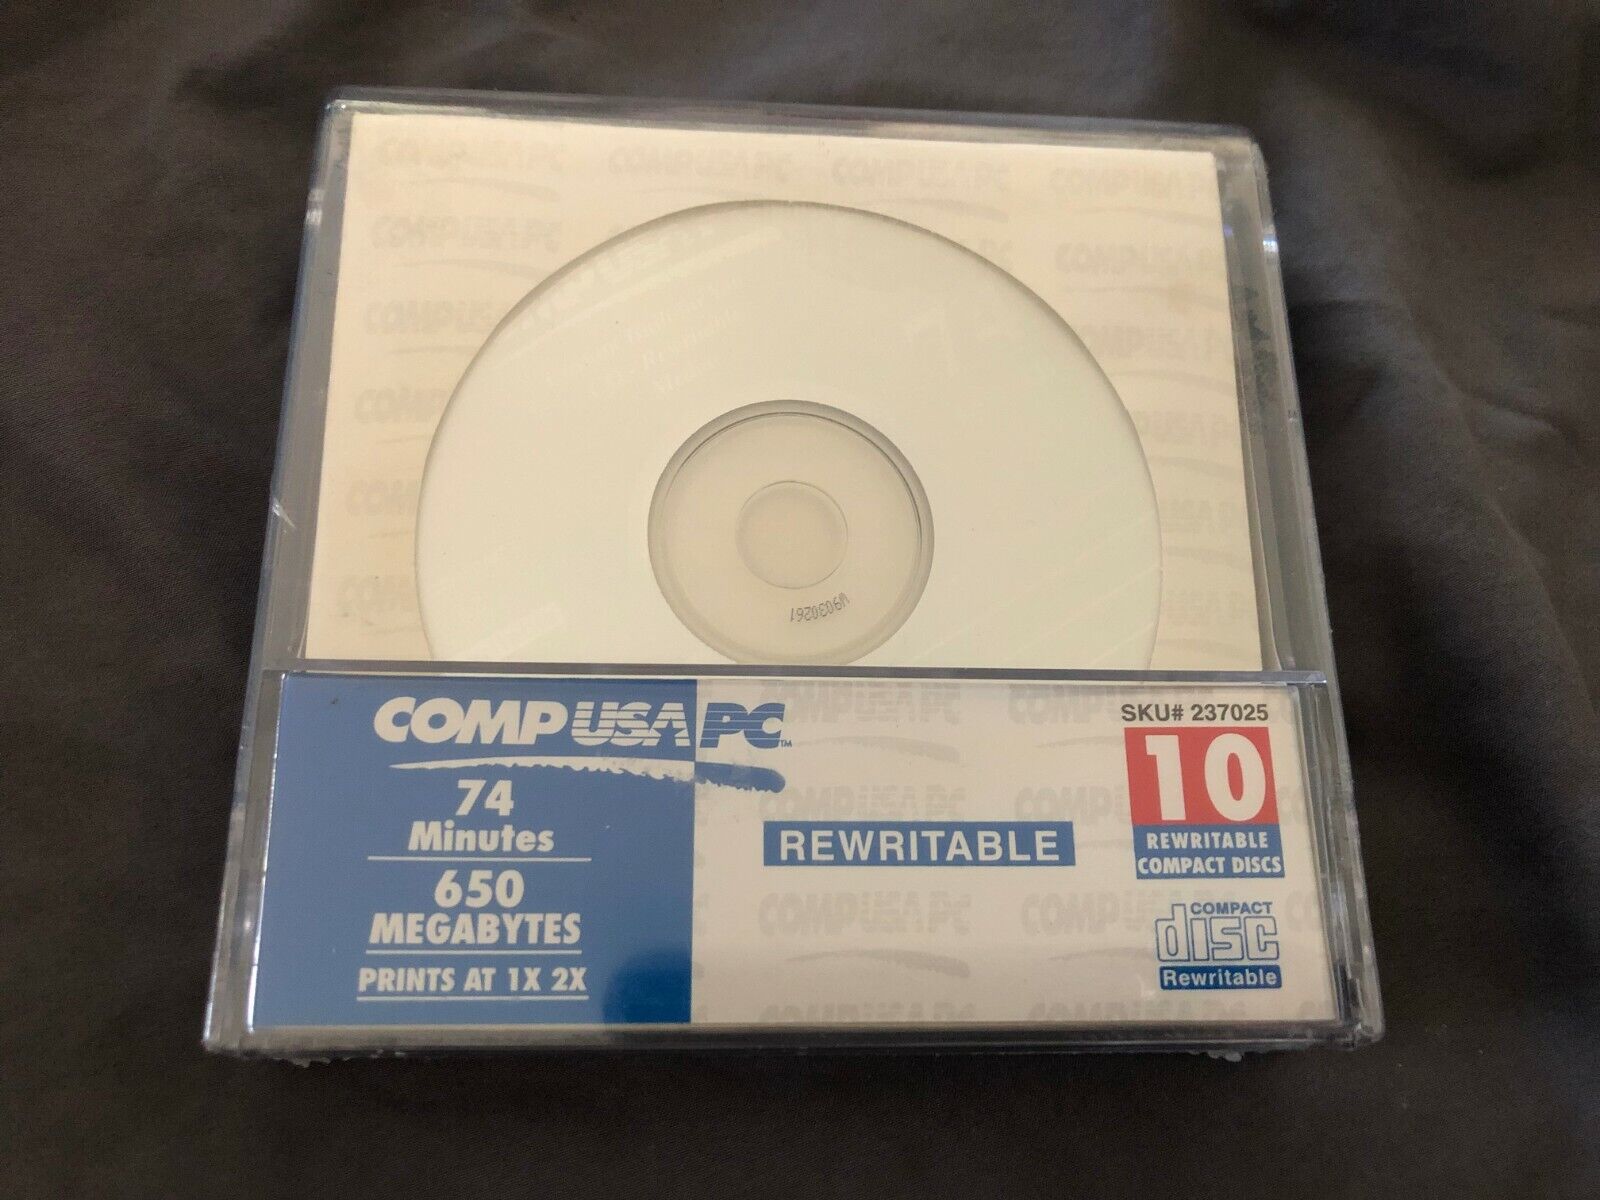 Comp[USA PC New Rewritable Compact Discs 10 pack 650 MB 74 Min 